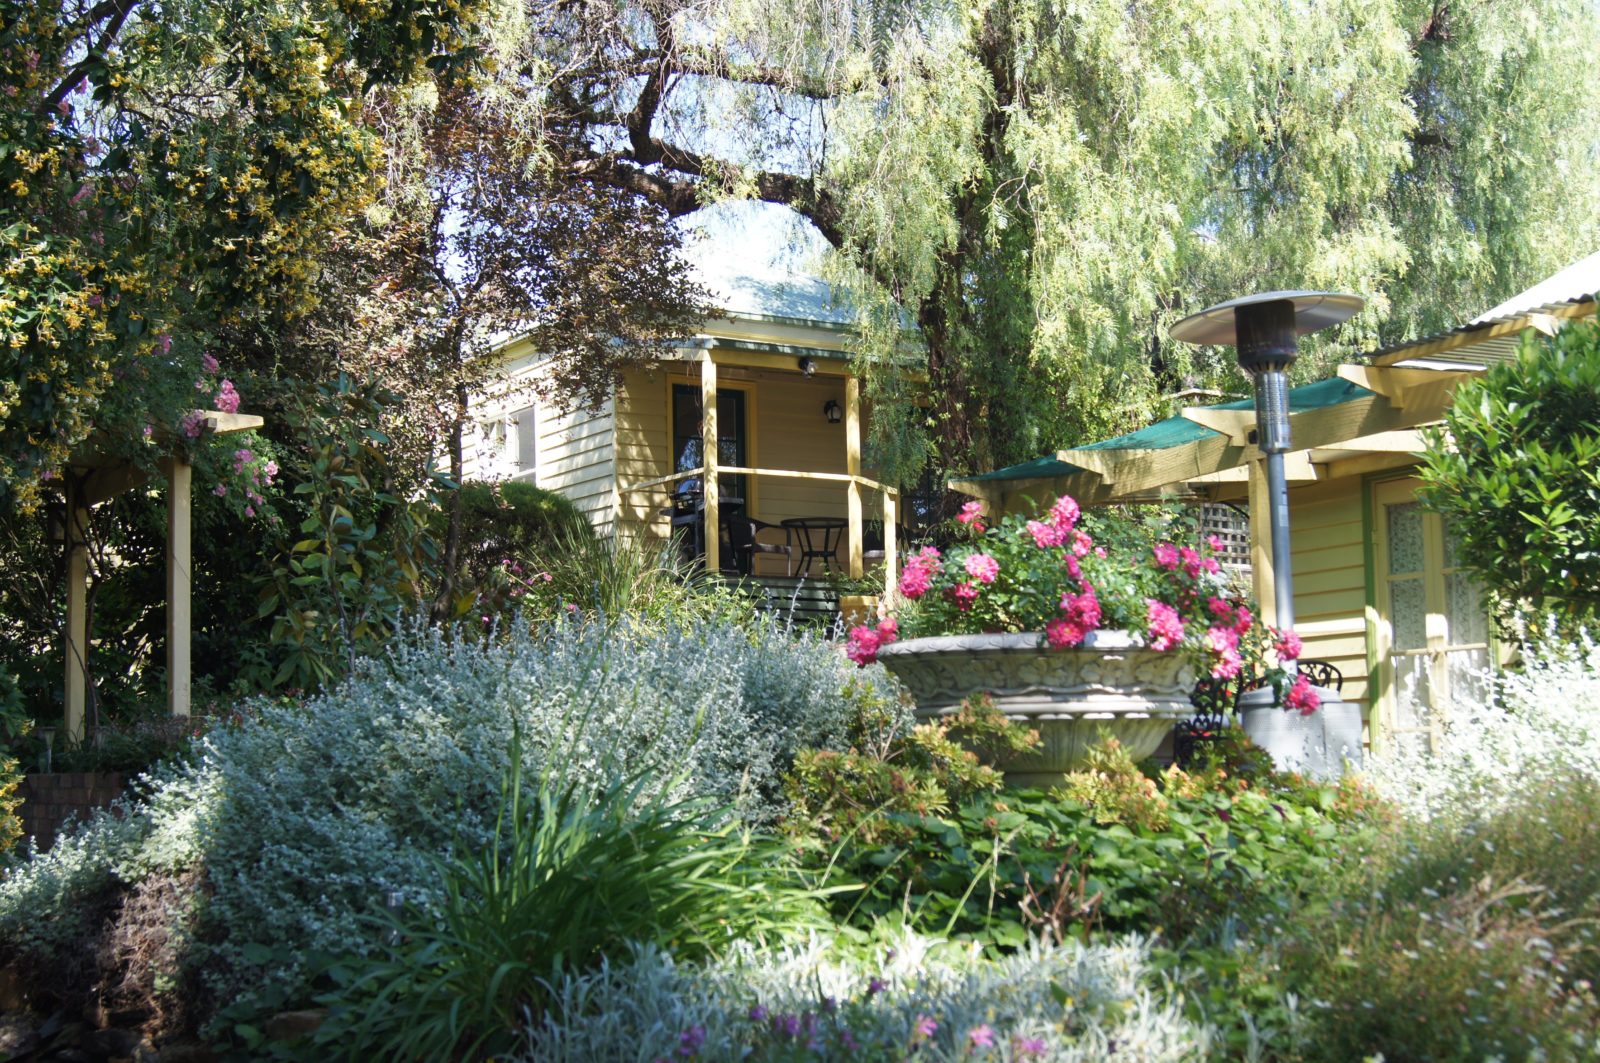 Rose Cottage overlooking the garden. The verandah is shaded by trees. There are steps leading up.